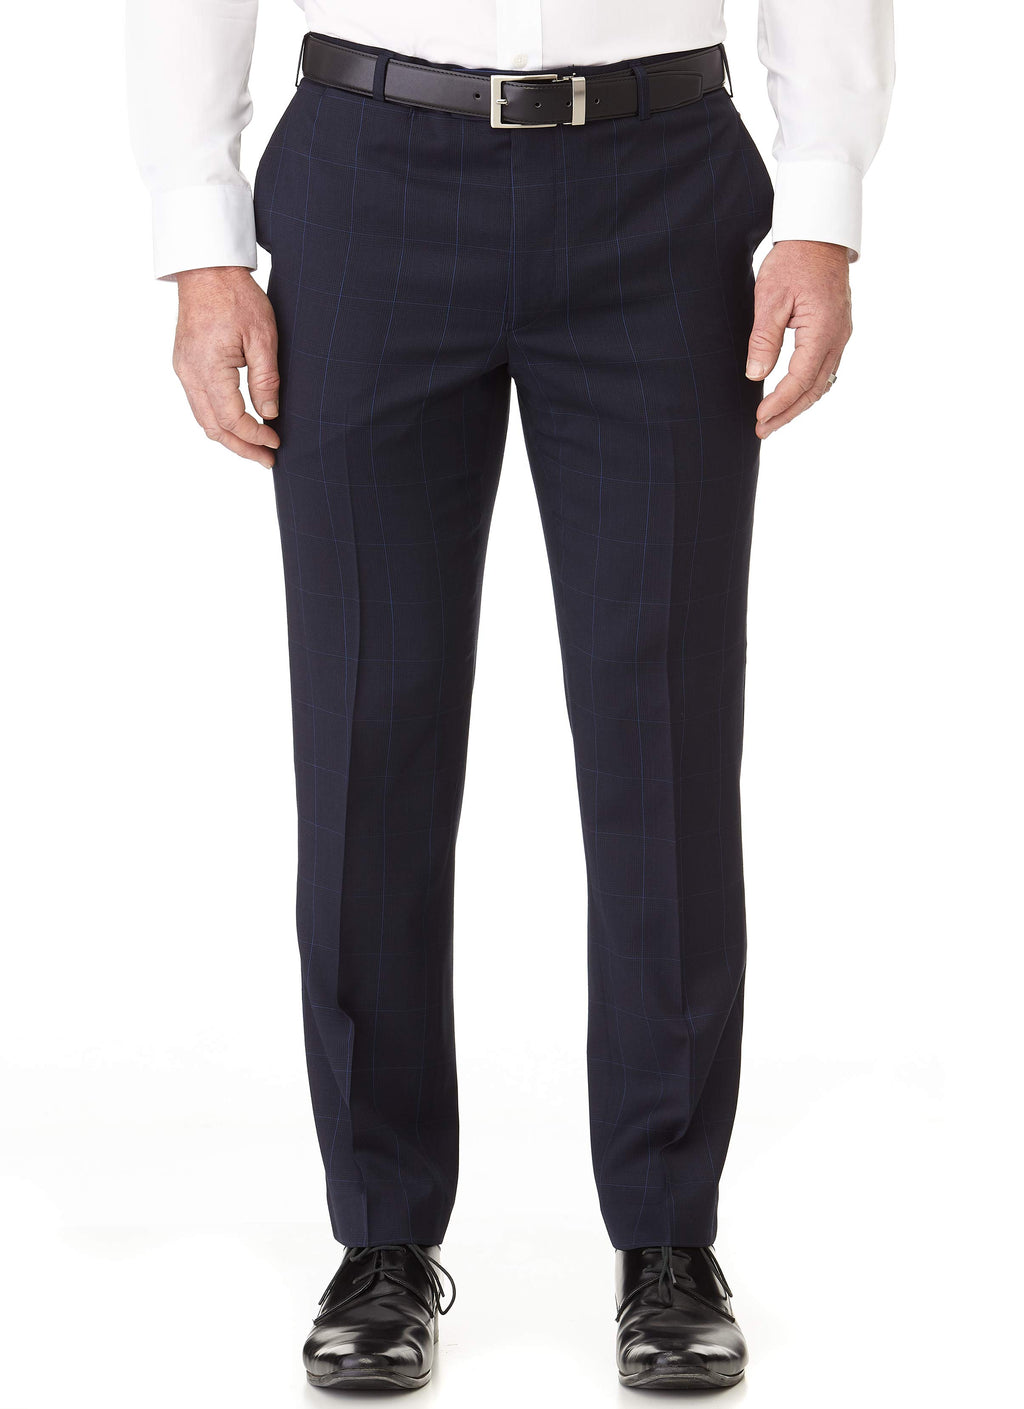 OTWAY CONTEMPORARY FIT TROUSER - NAVY WINDOWPANE